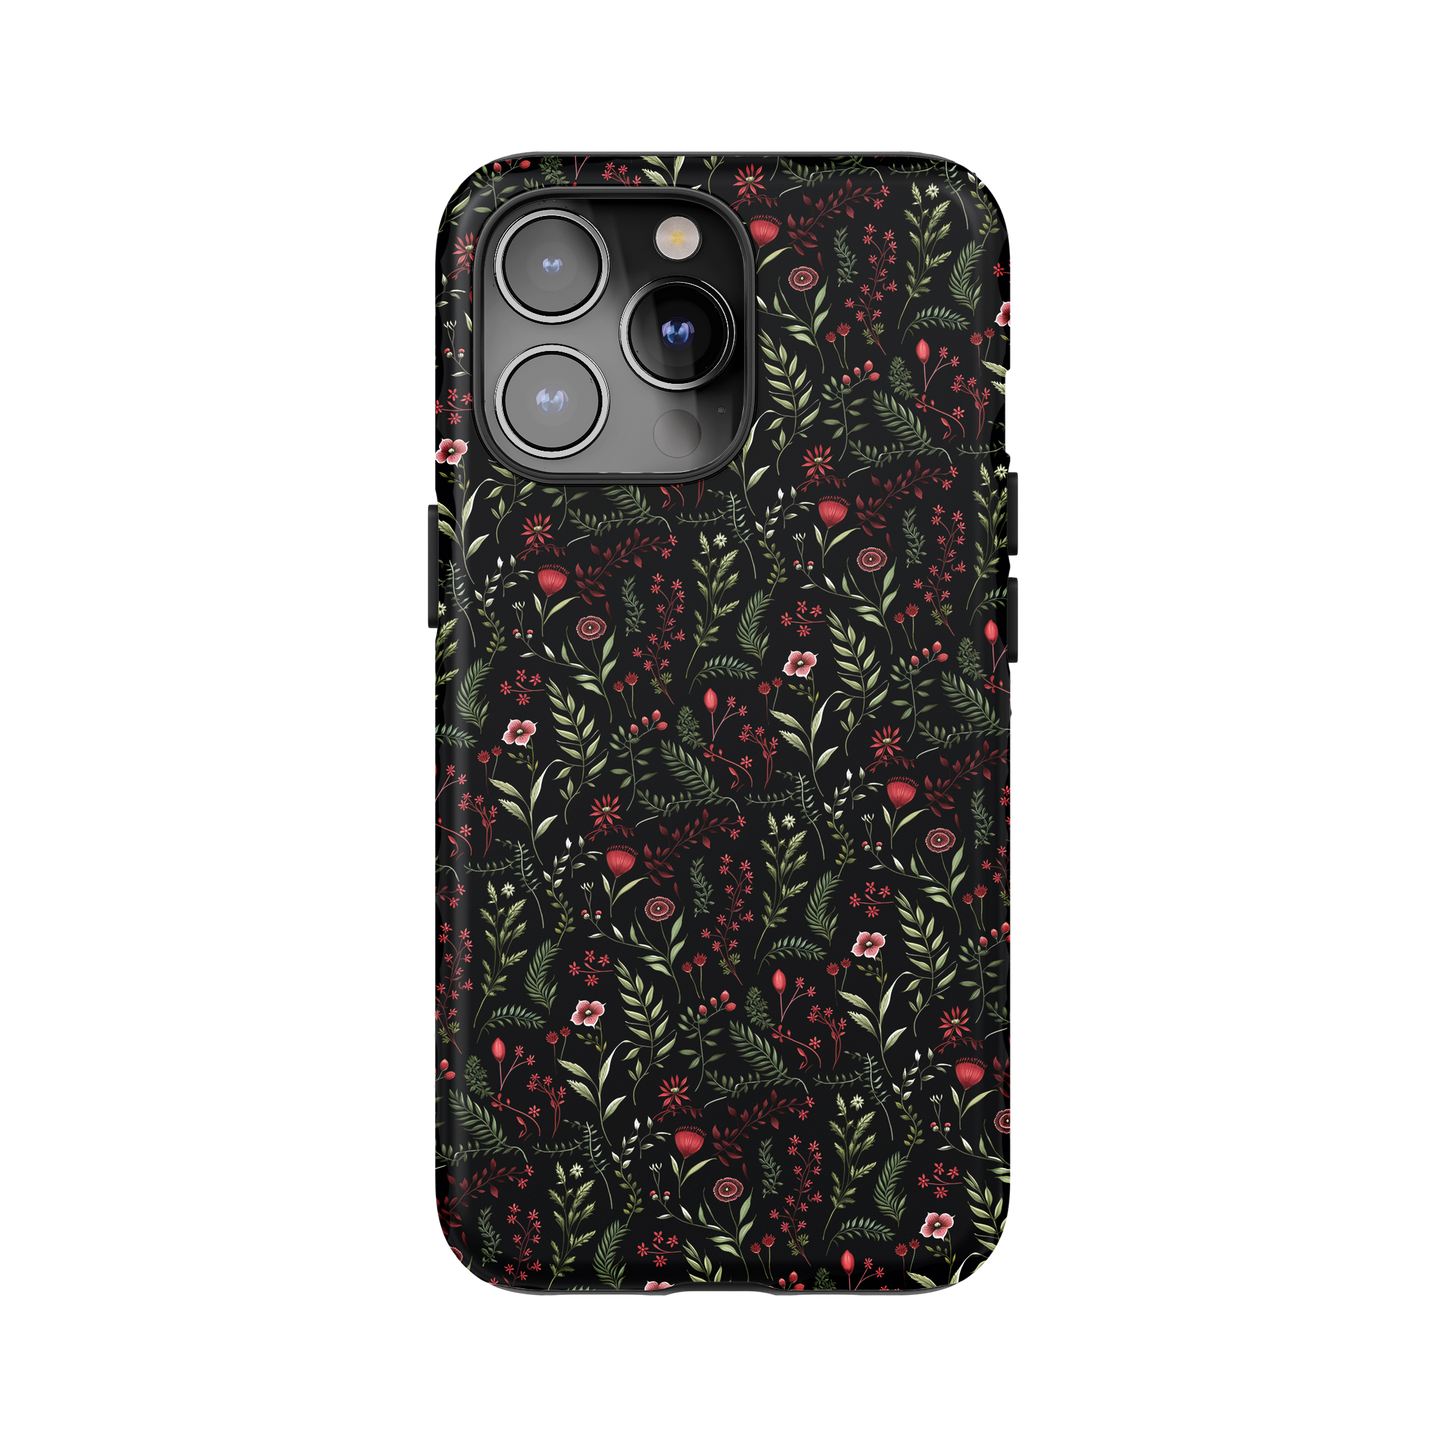 Dark Floral Phone Case for iPhone and Samsung